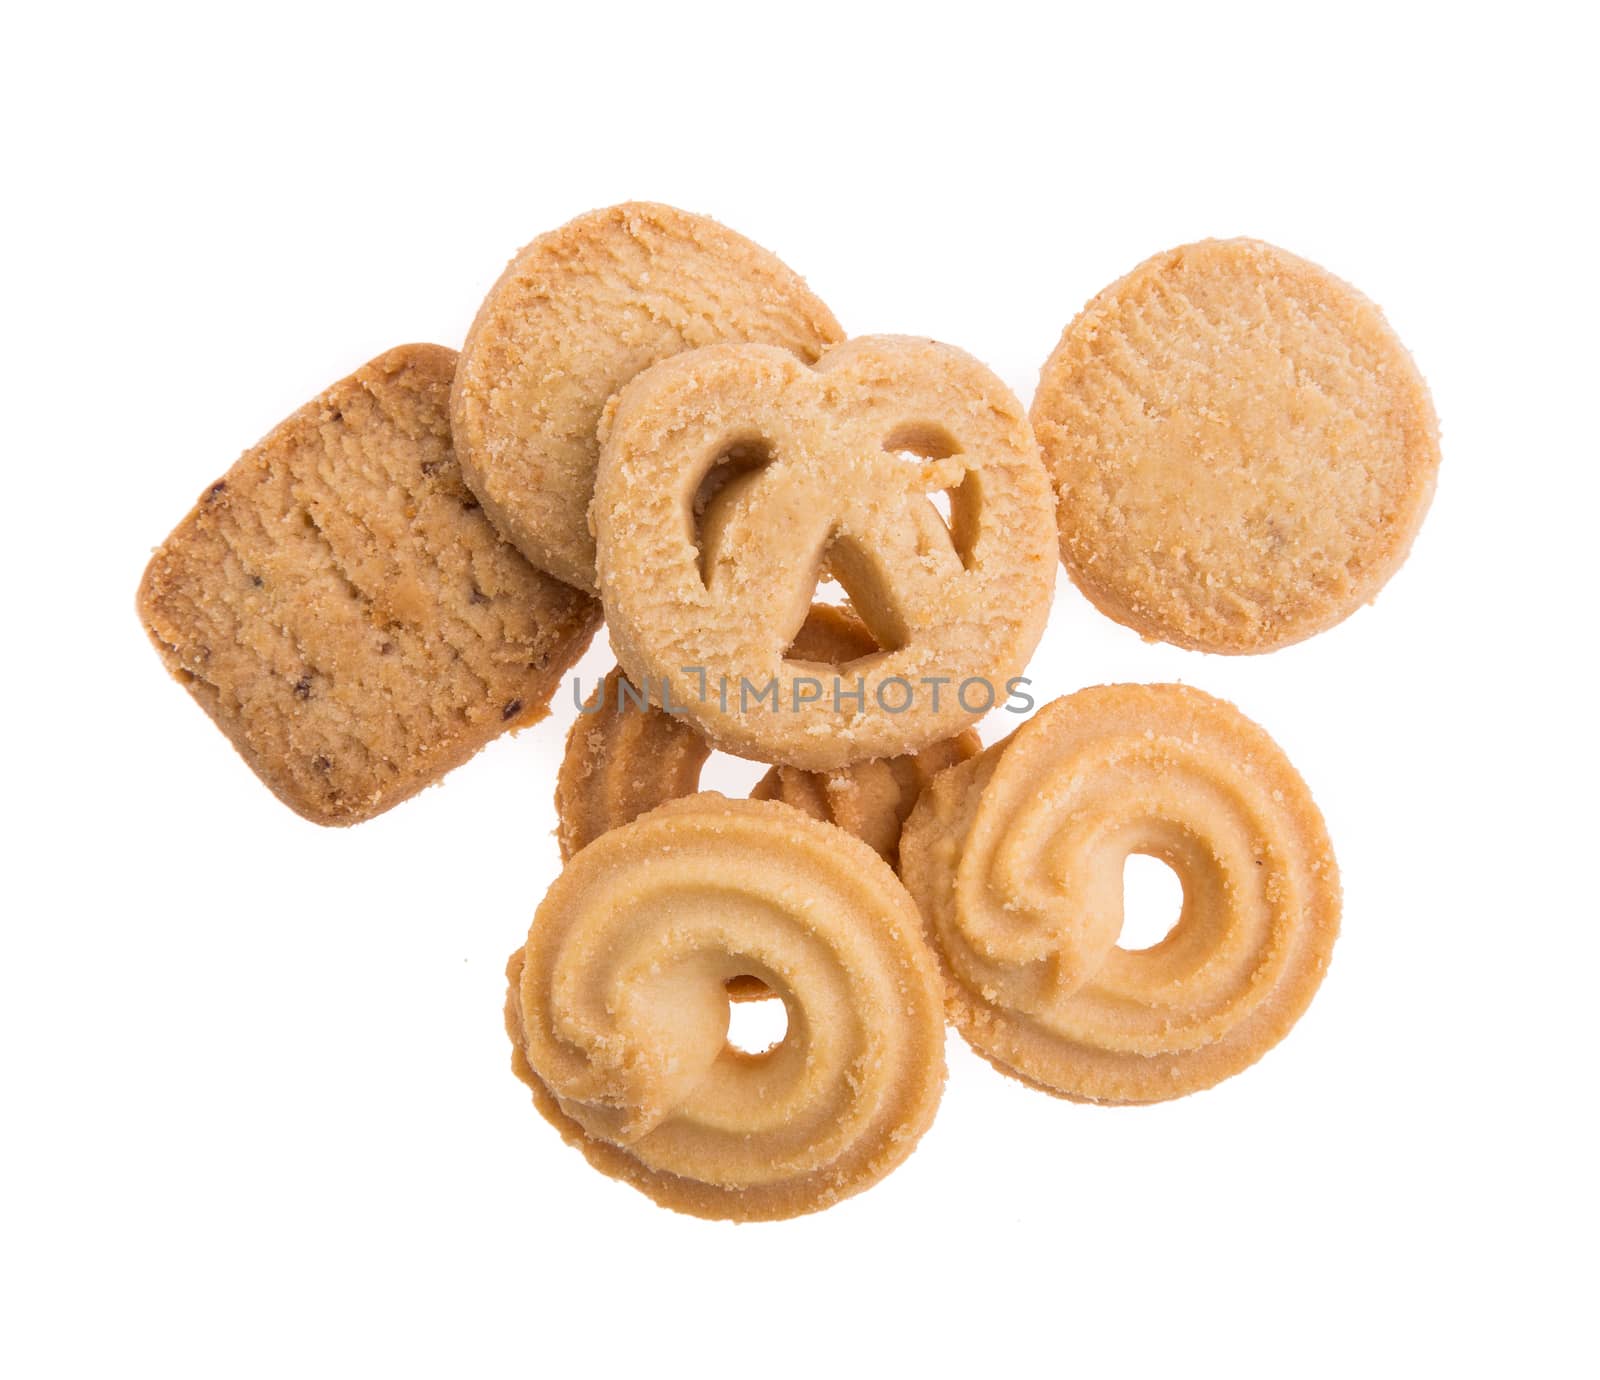 Butter cookies isolated on white background